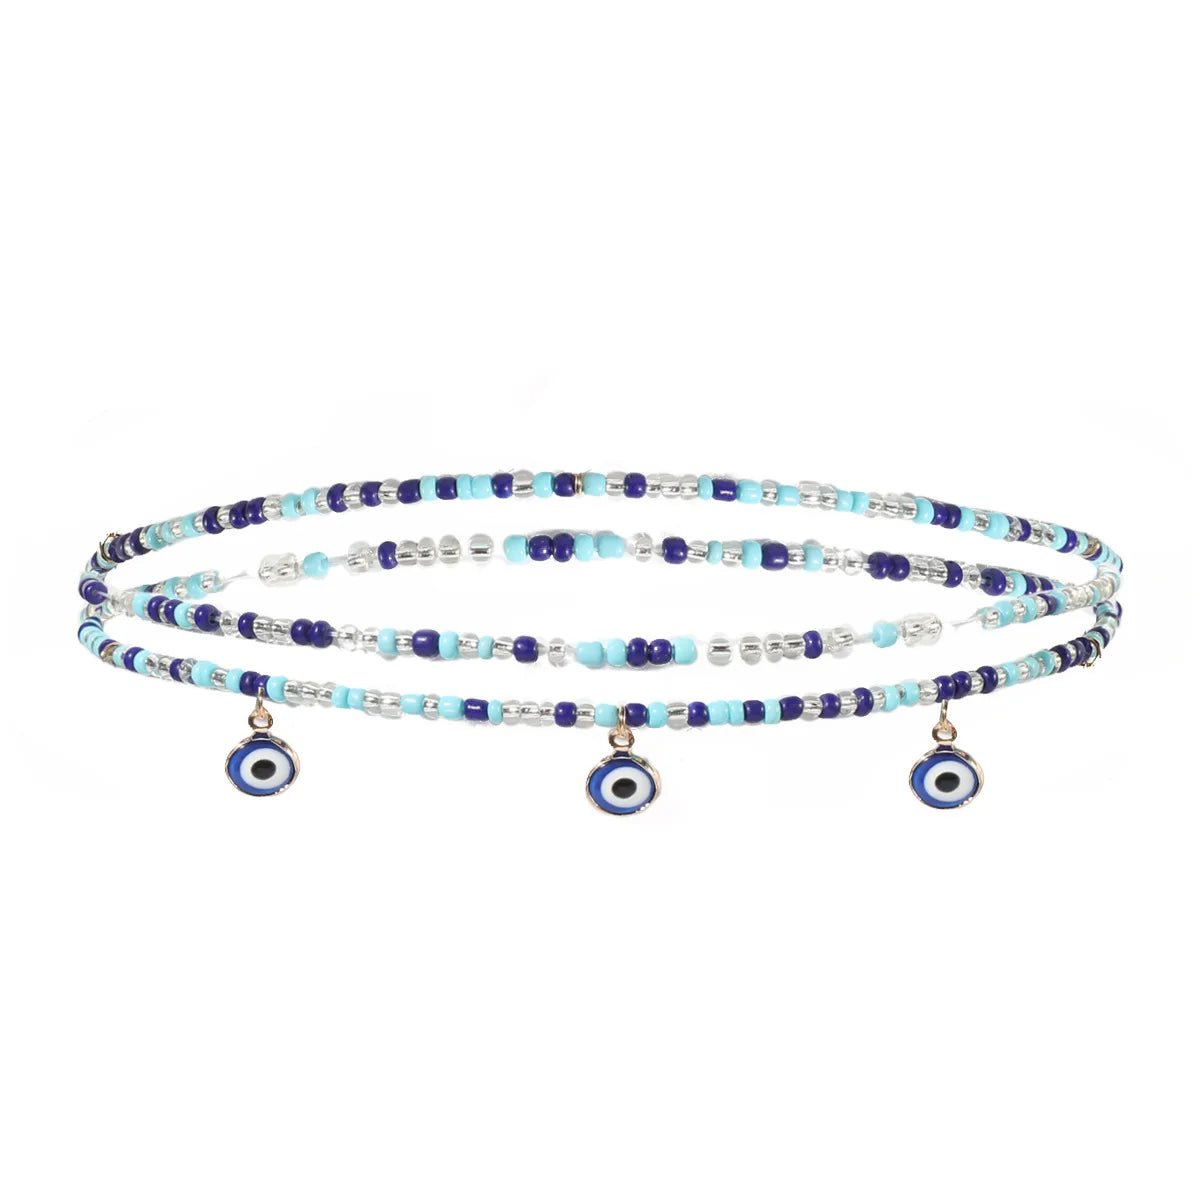 Boho African Belly Chain: Mixed Colors Rice Beads with Heart Shell Star Pendant, Stretch Waist Jewelry - Flexi Africa - Flexi Africa offers Free Delivery Worldwide - Vibrant African traditional clothing showcasing bold prints and intricate designs